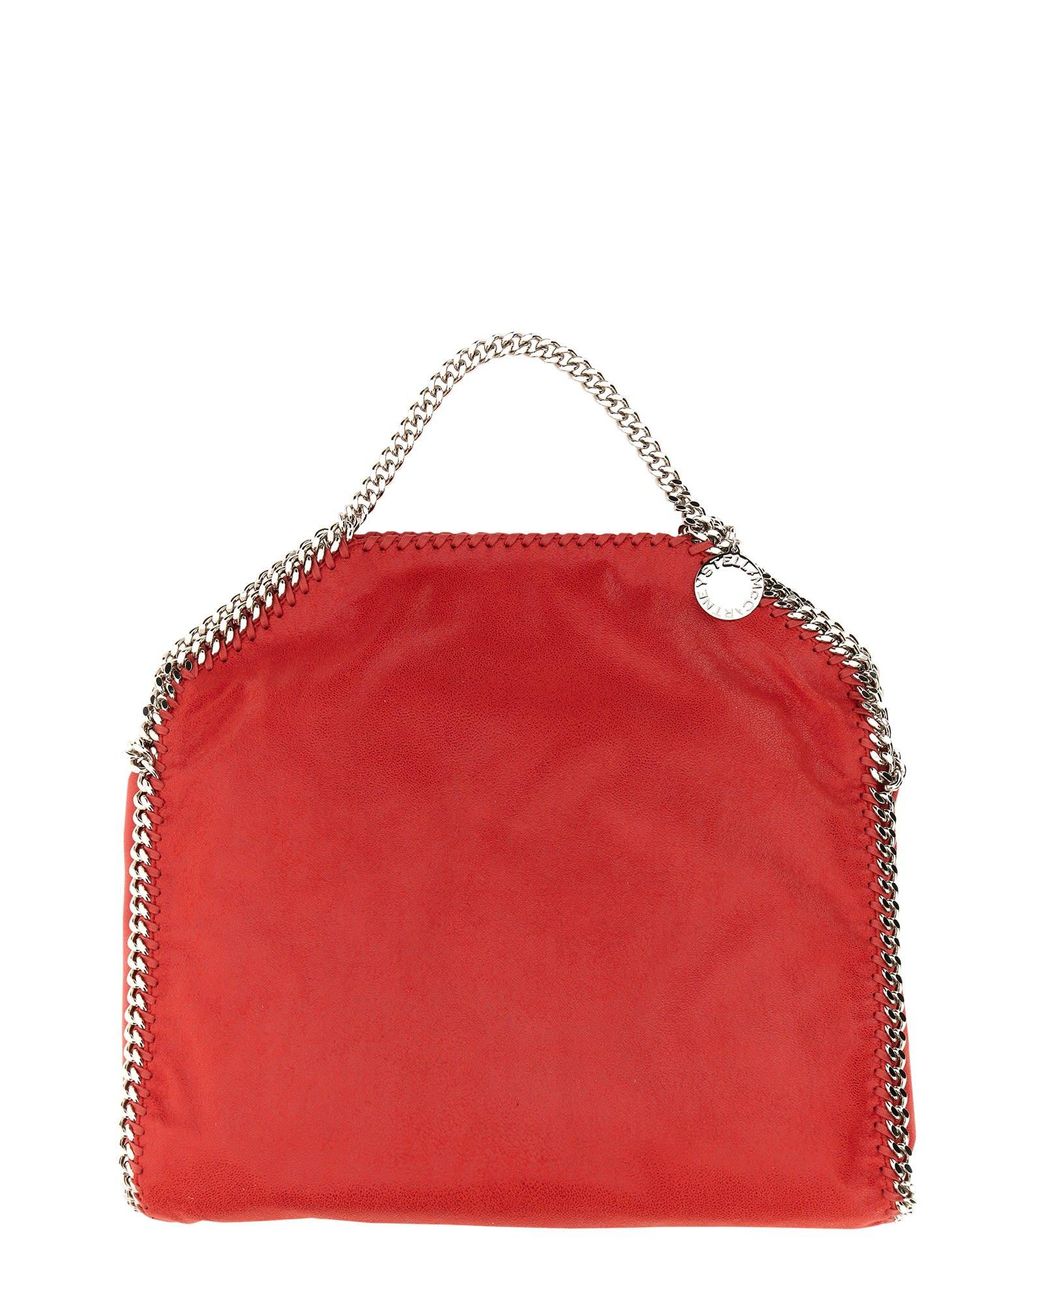 Stella McCartney Falabella Fold Over Tote Bag in Red | Lyst